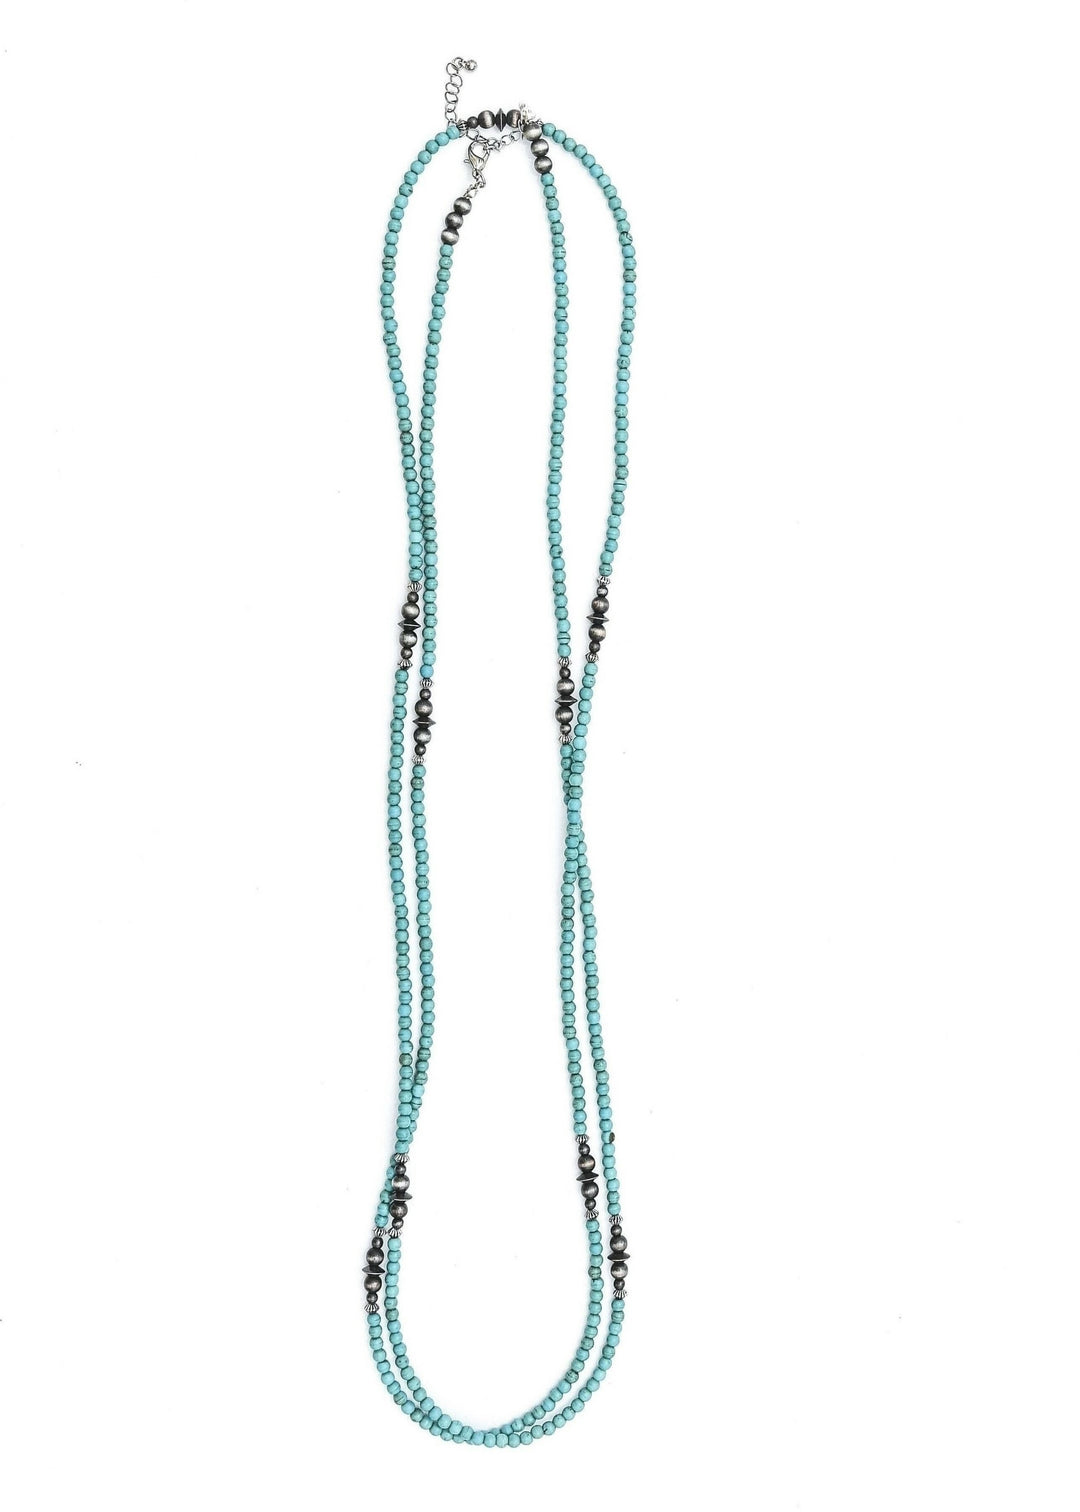 West and Co Turquoise Necklace with Navajo Pearl Accents